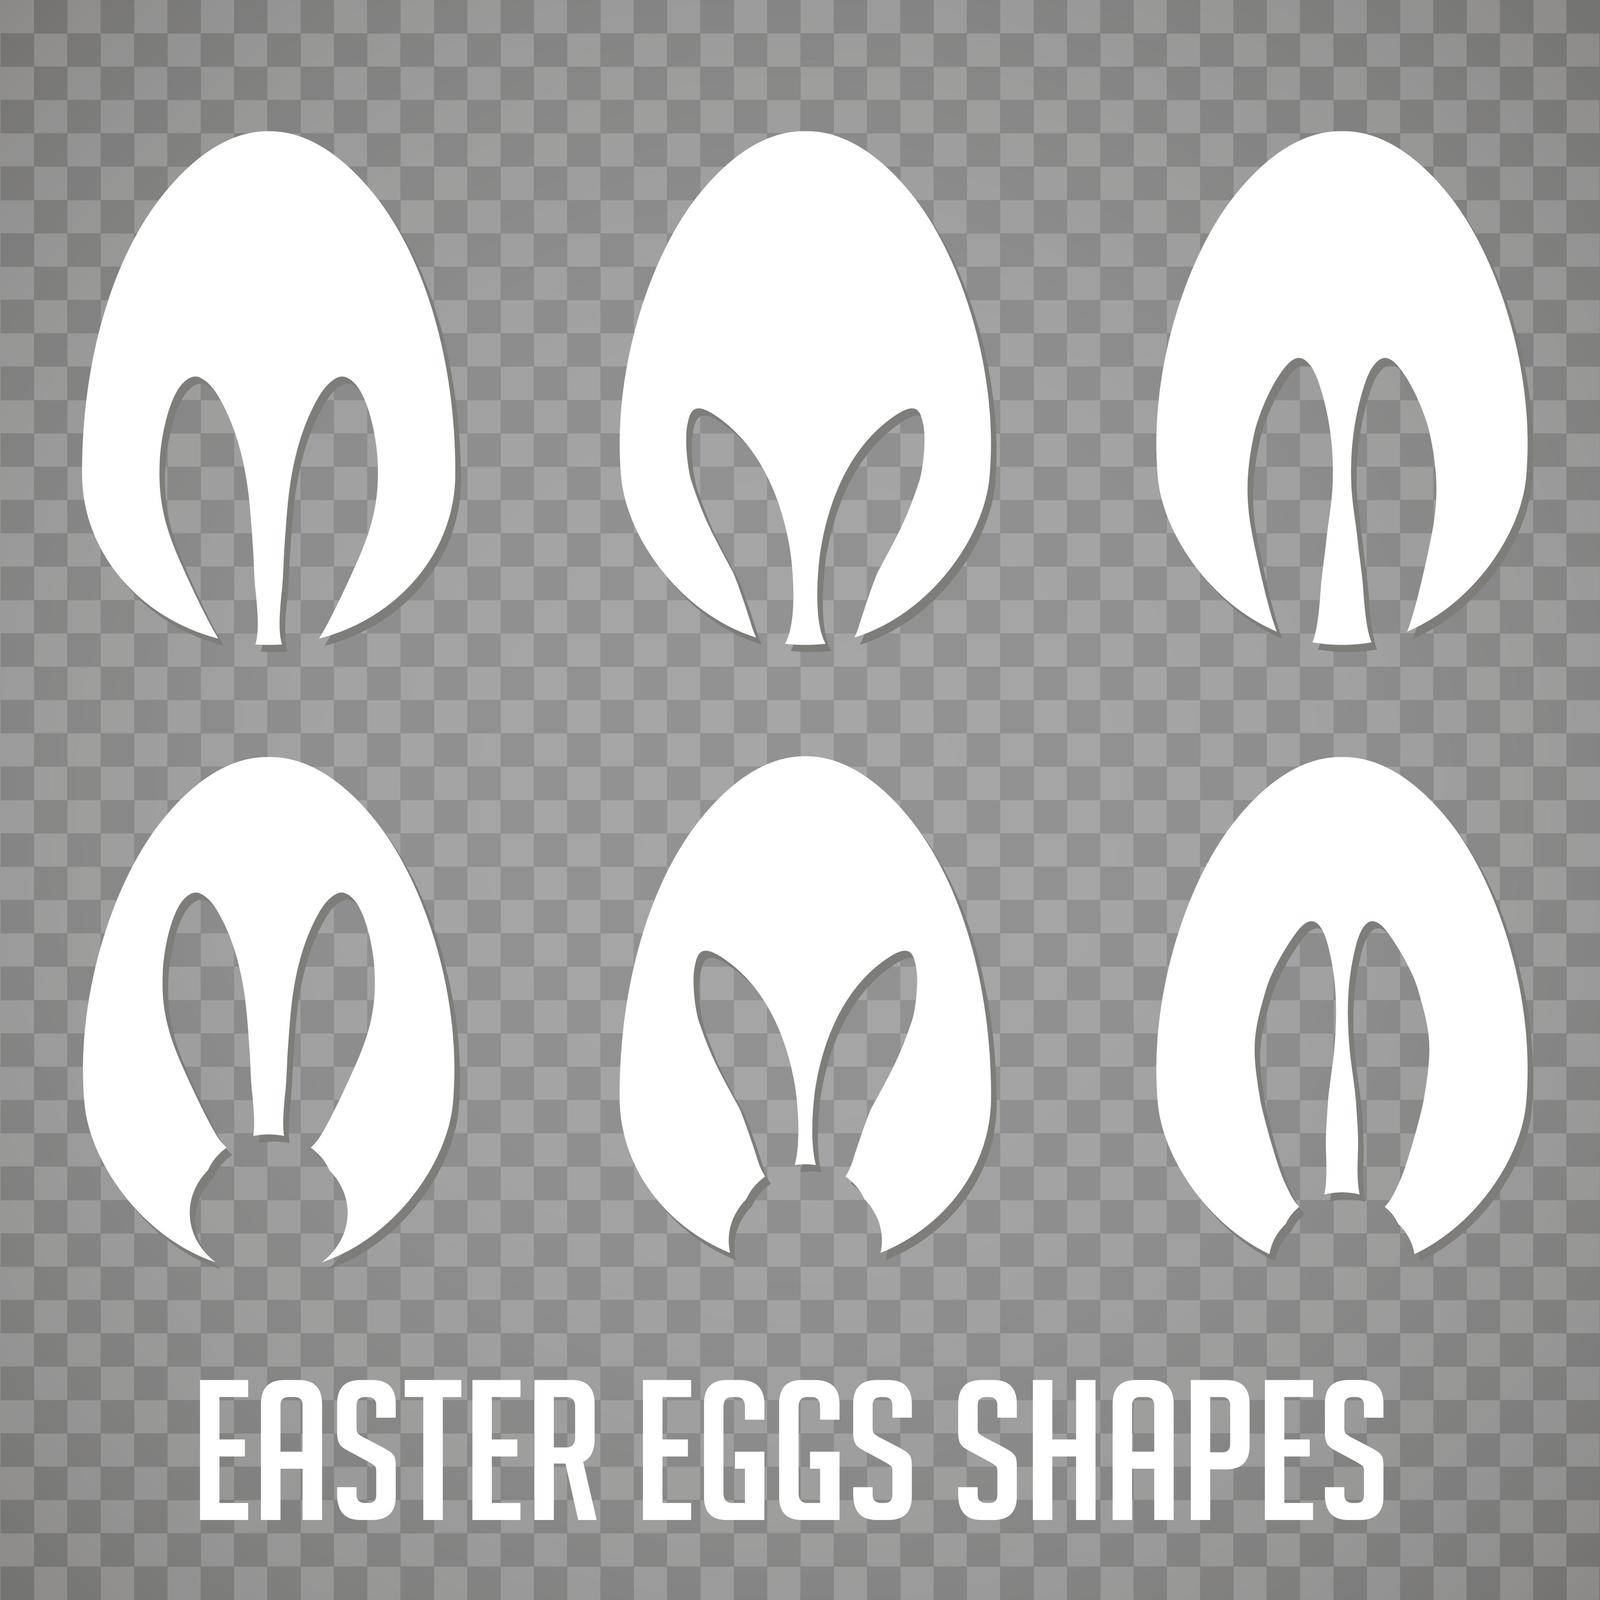 Easter eggs shapes with bunny ears silhouette - set by Valeriya_Dor